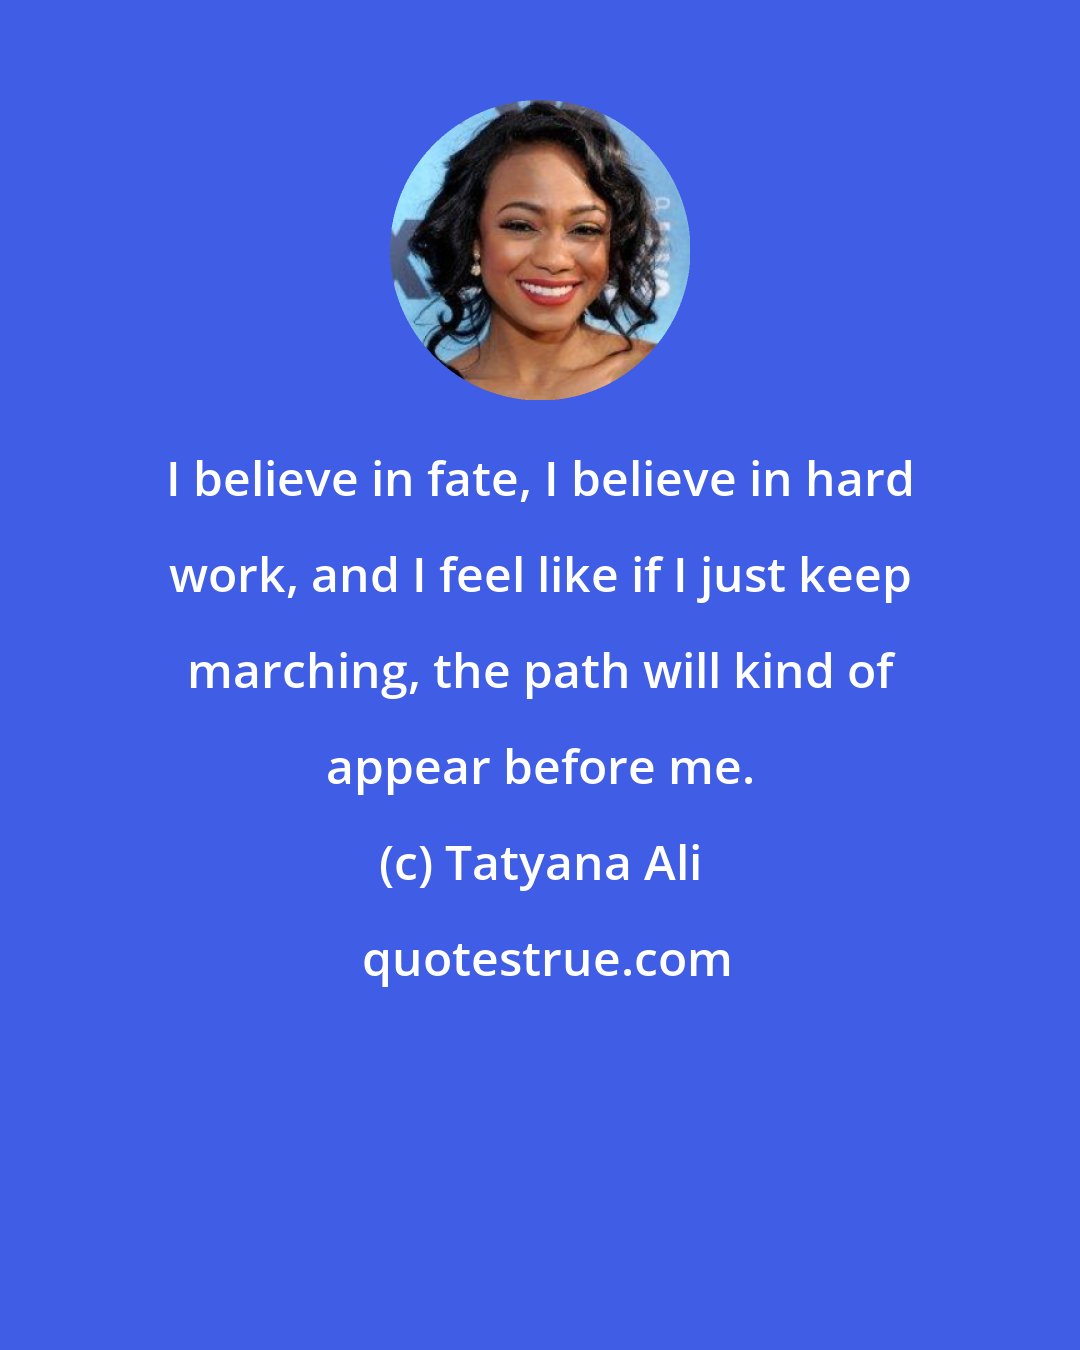 Tatyana Ali: I believe in fate, I believe in hard work, and I feel like if I just keep marching, the path will kind of appear before me.